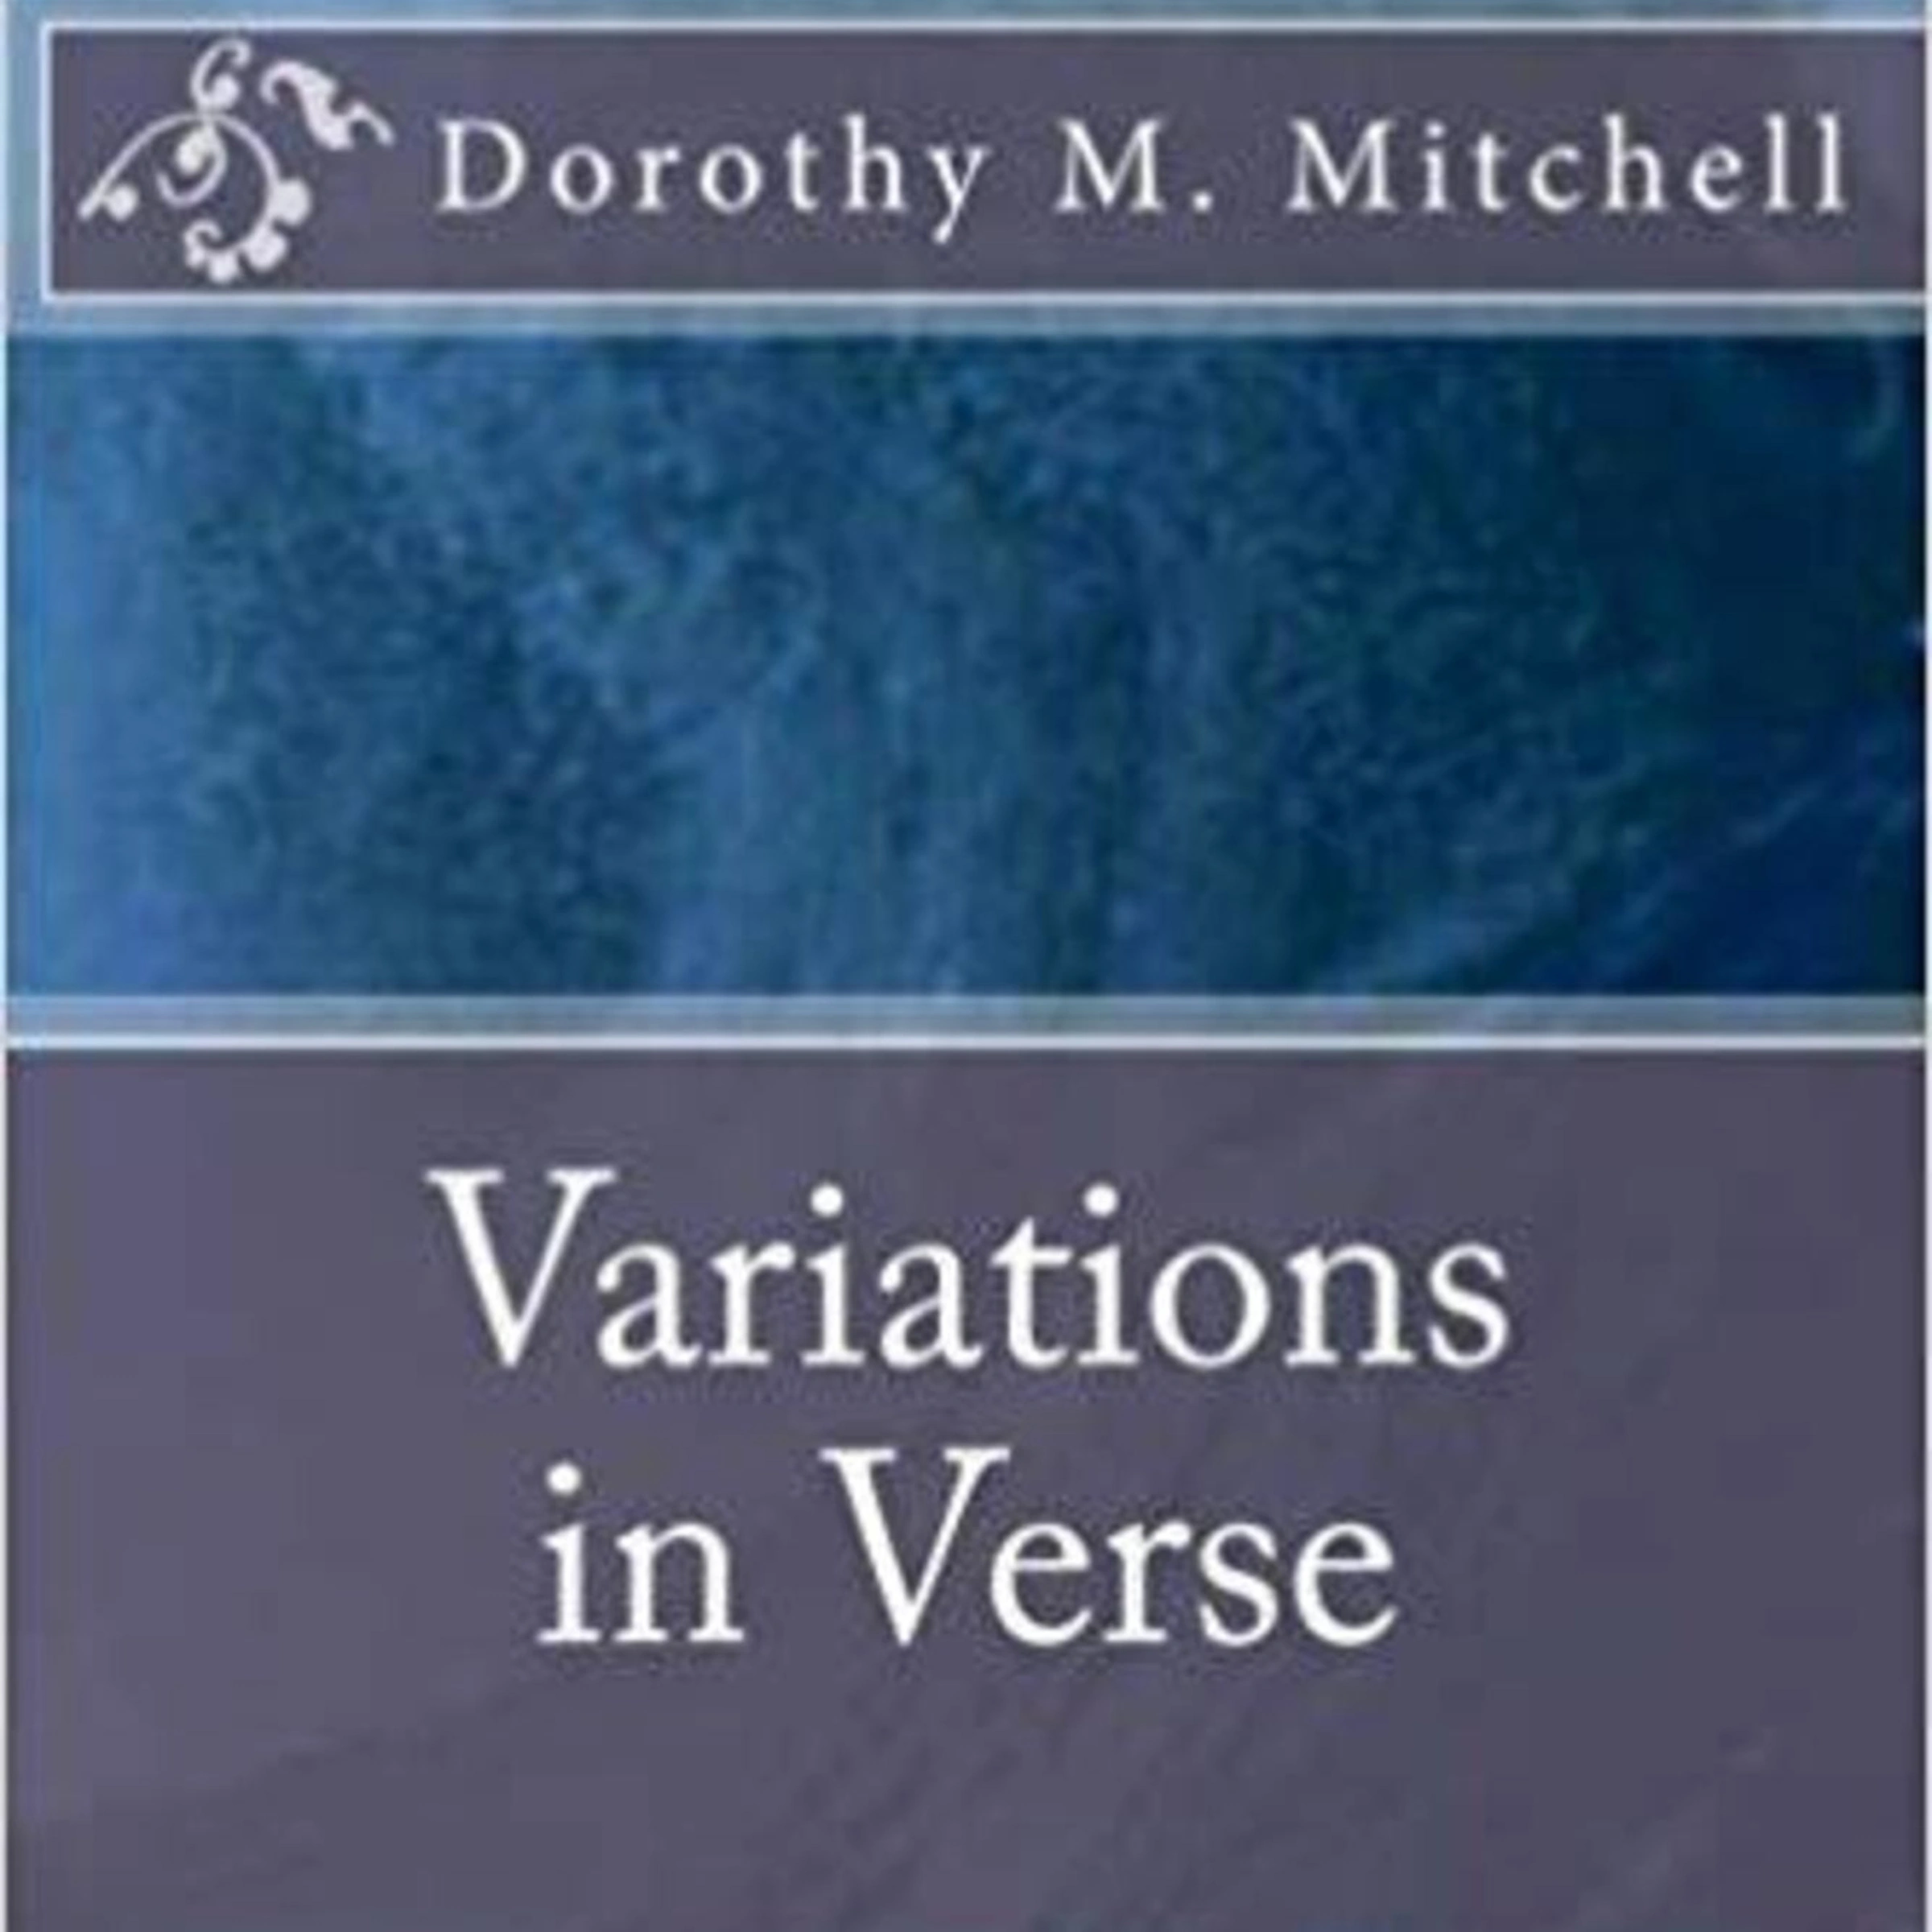 Variations in Verse by Dorothy M. Mitchell Audiobook